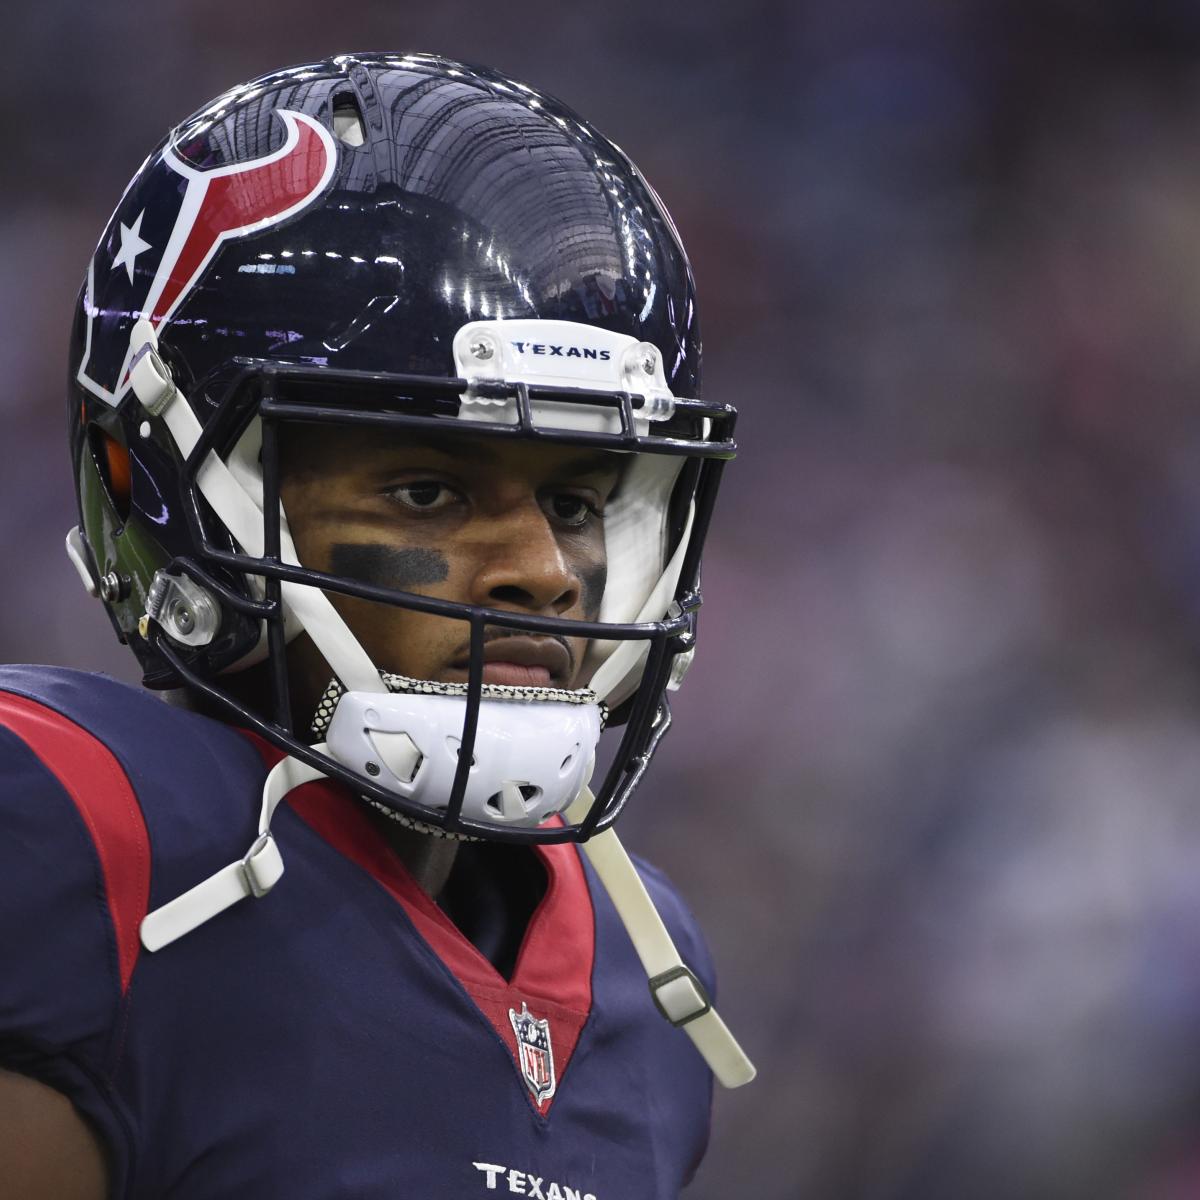 Deshaun Watson throws three TD passes to lead the Houston Texans past the  Oakland Raiders: Recap, score, stats and more 